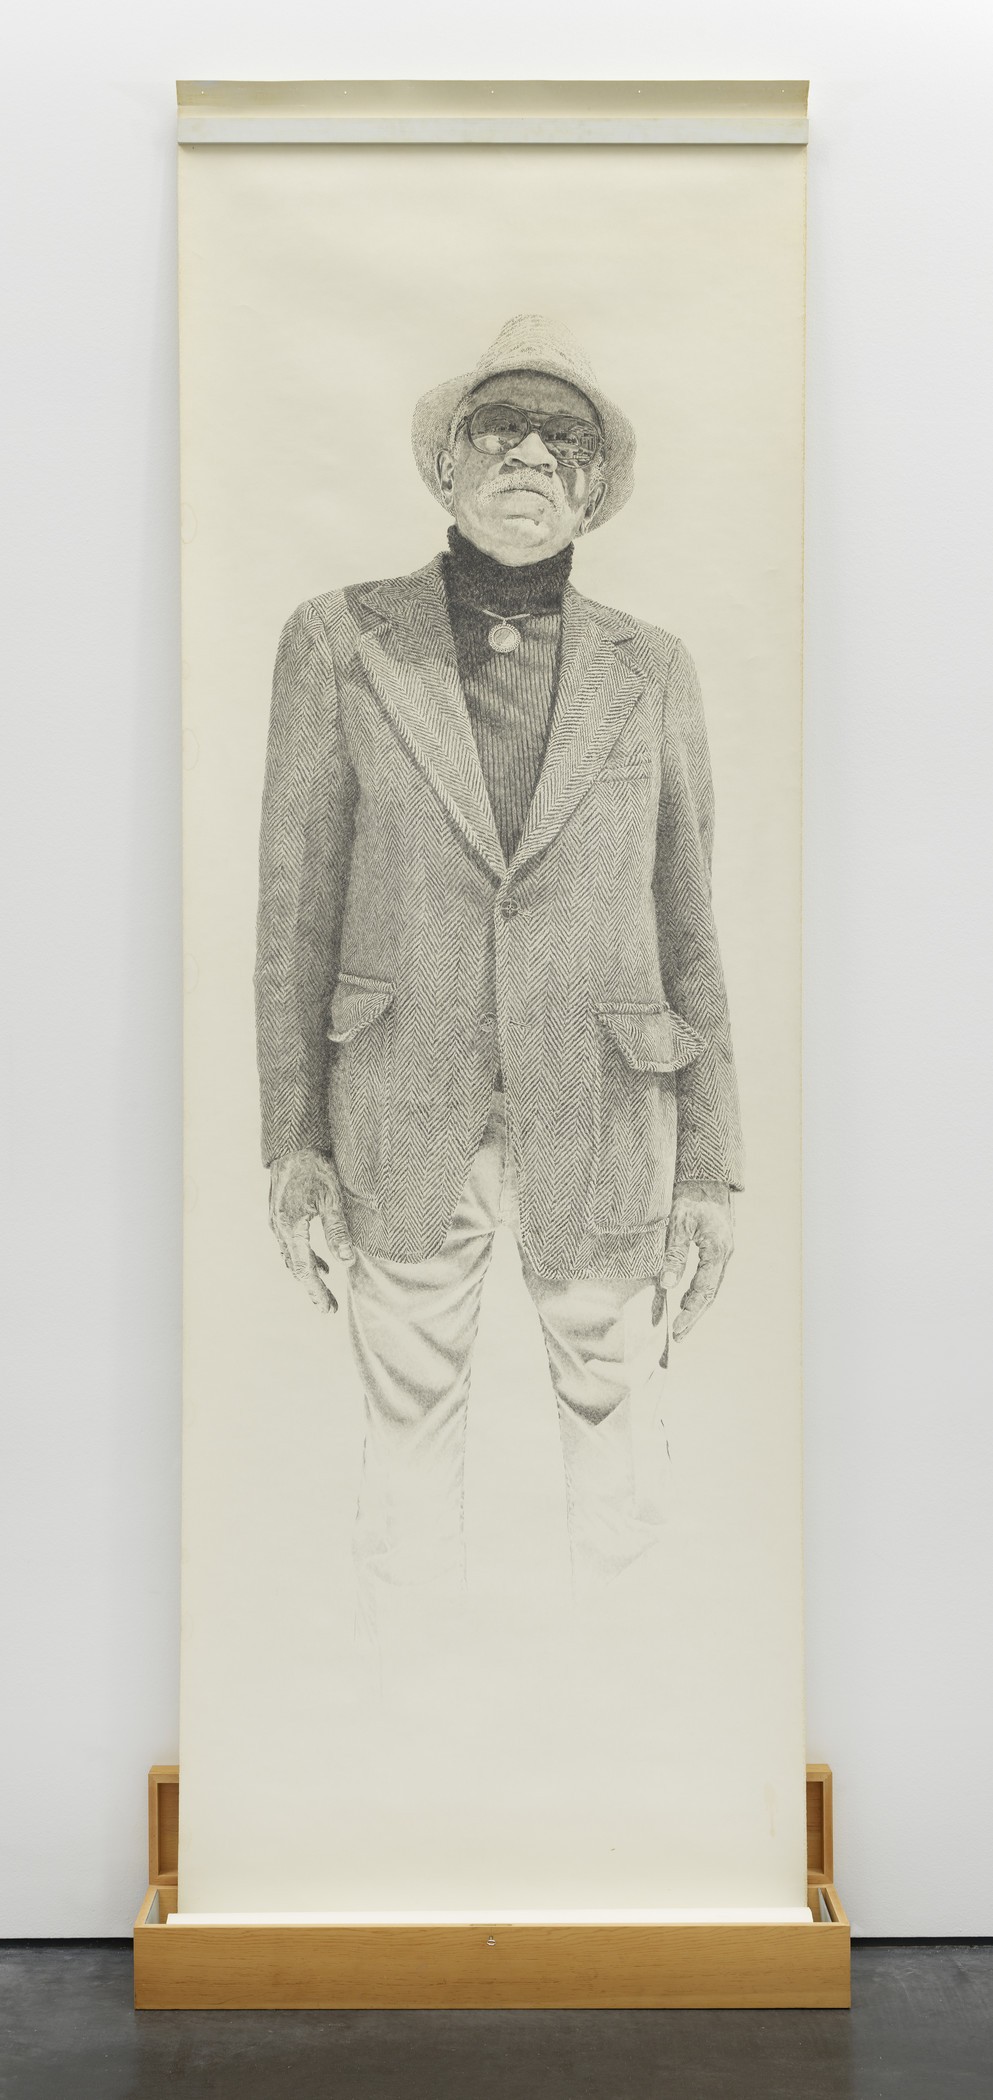 Image: Kent Twitchell, Portrait of Charles White, 1977